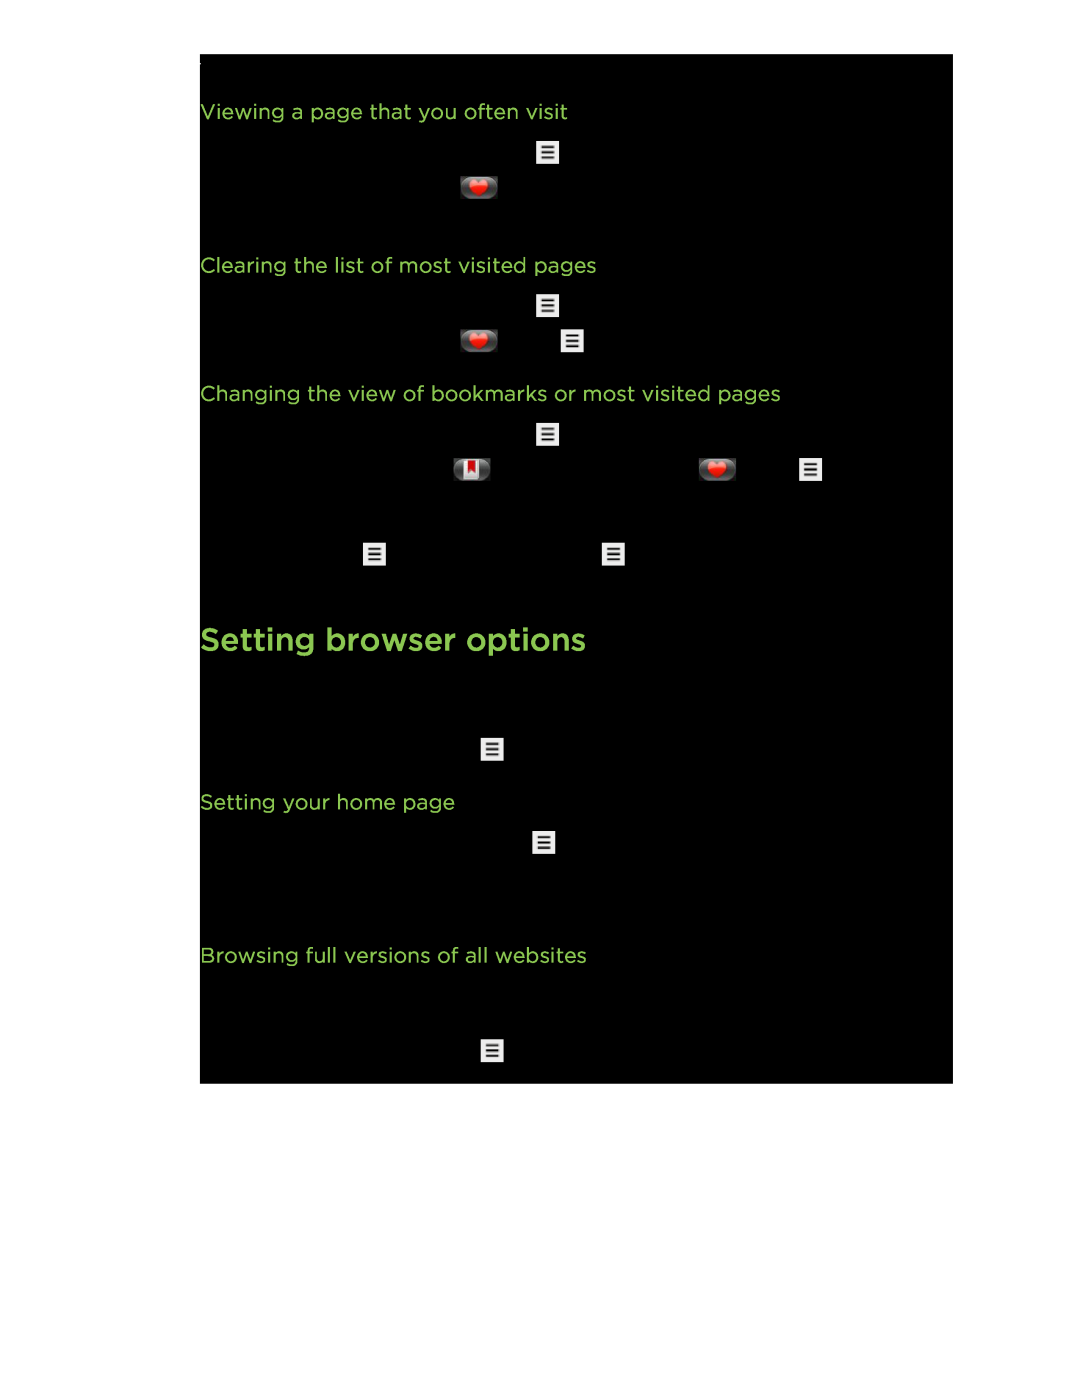 HTC manual Setting browser options, Viewing a page that you often visit, Clearing the list of most visited pages 